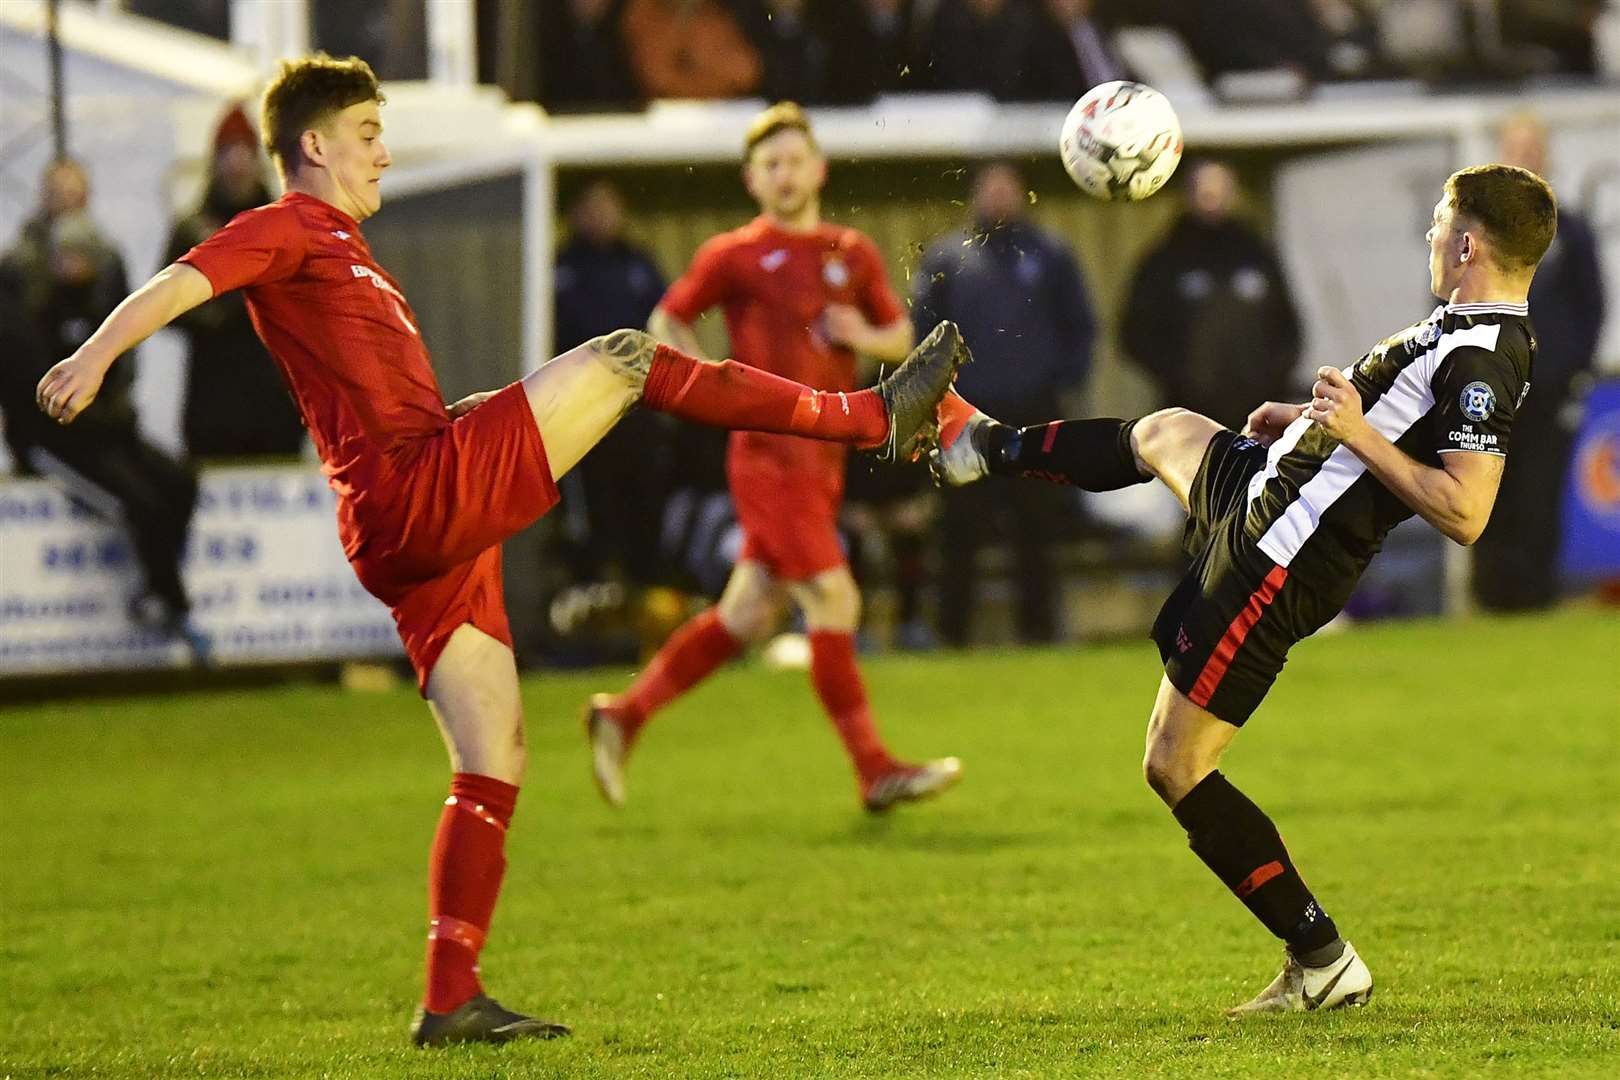 Kyle Macleod of Brora and Jack Henry of Wick Academy challenge for the ball during Wednesday night's north derby. Picture: Mel Roger